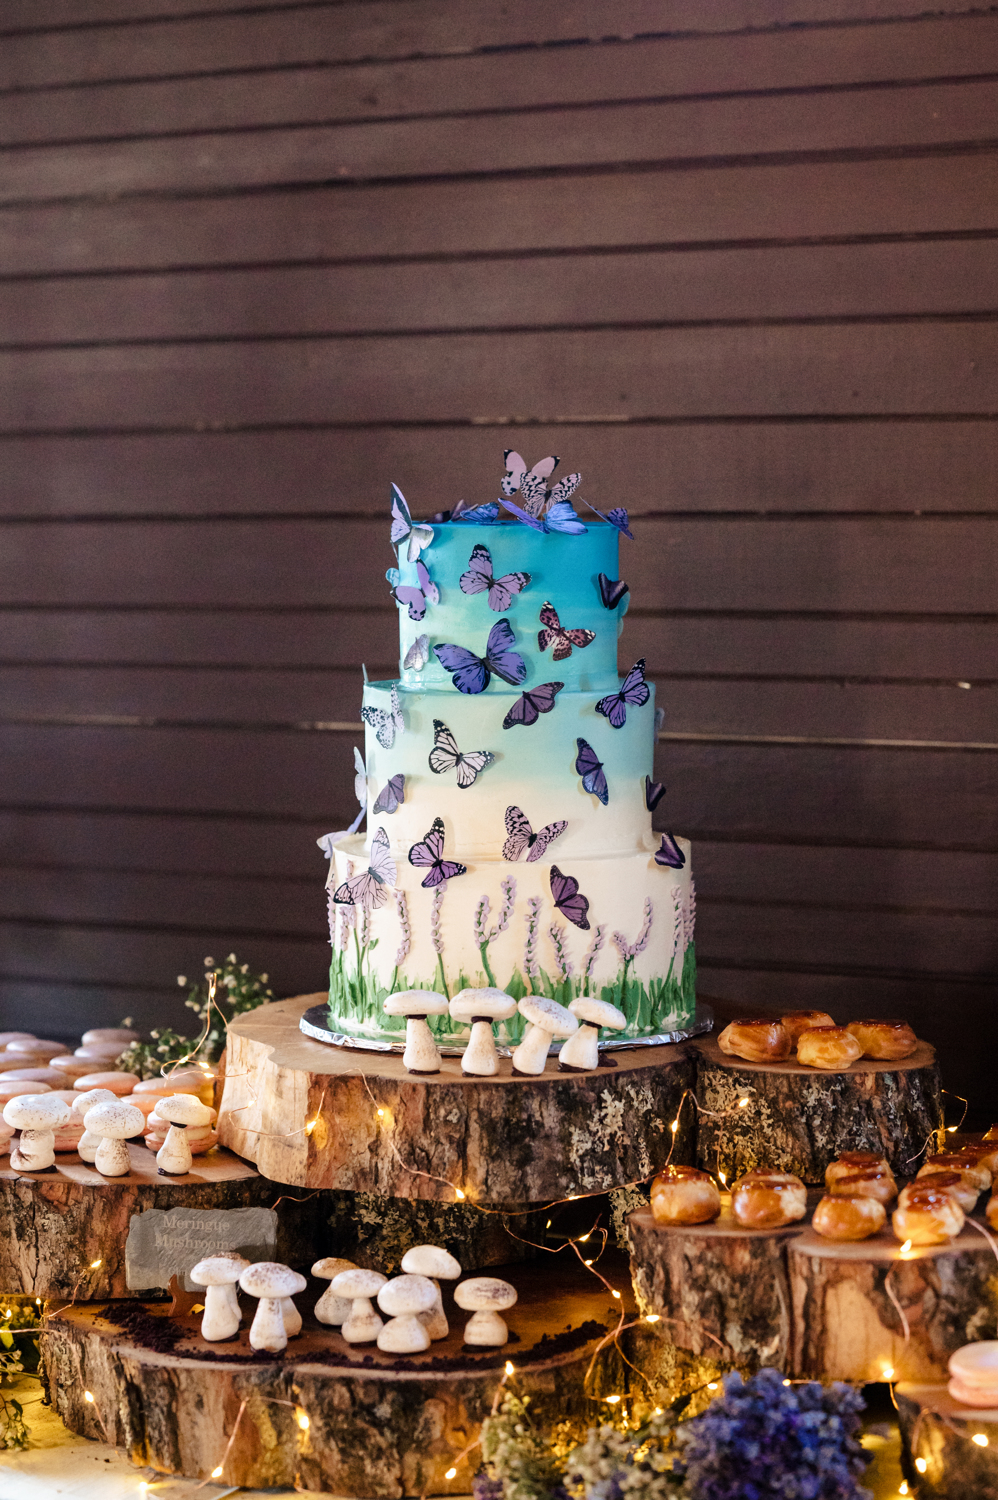 Fanciful wedding dessert spread by The Goose Chase Cake Design, with a 3-tiered ombre butterfly cake, mushroom-shaped meringues, macarons, and cream puffs on rustic wood cookies with fairy lights and florals.